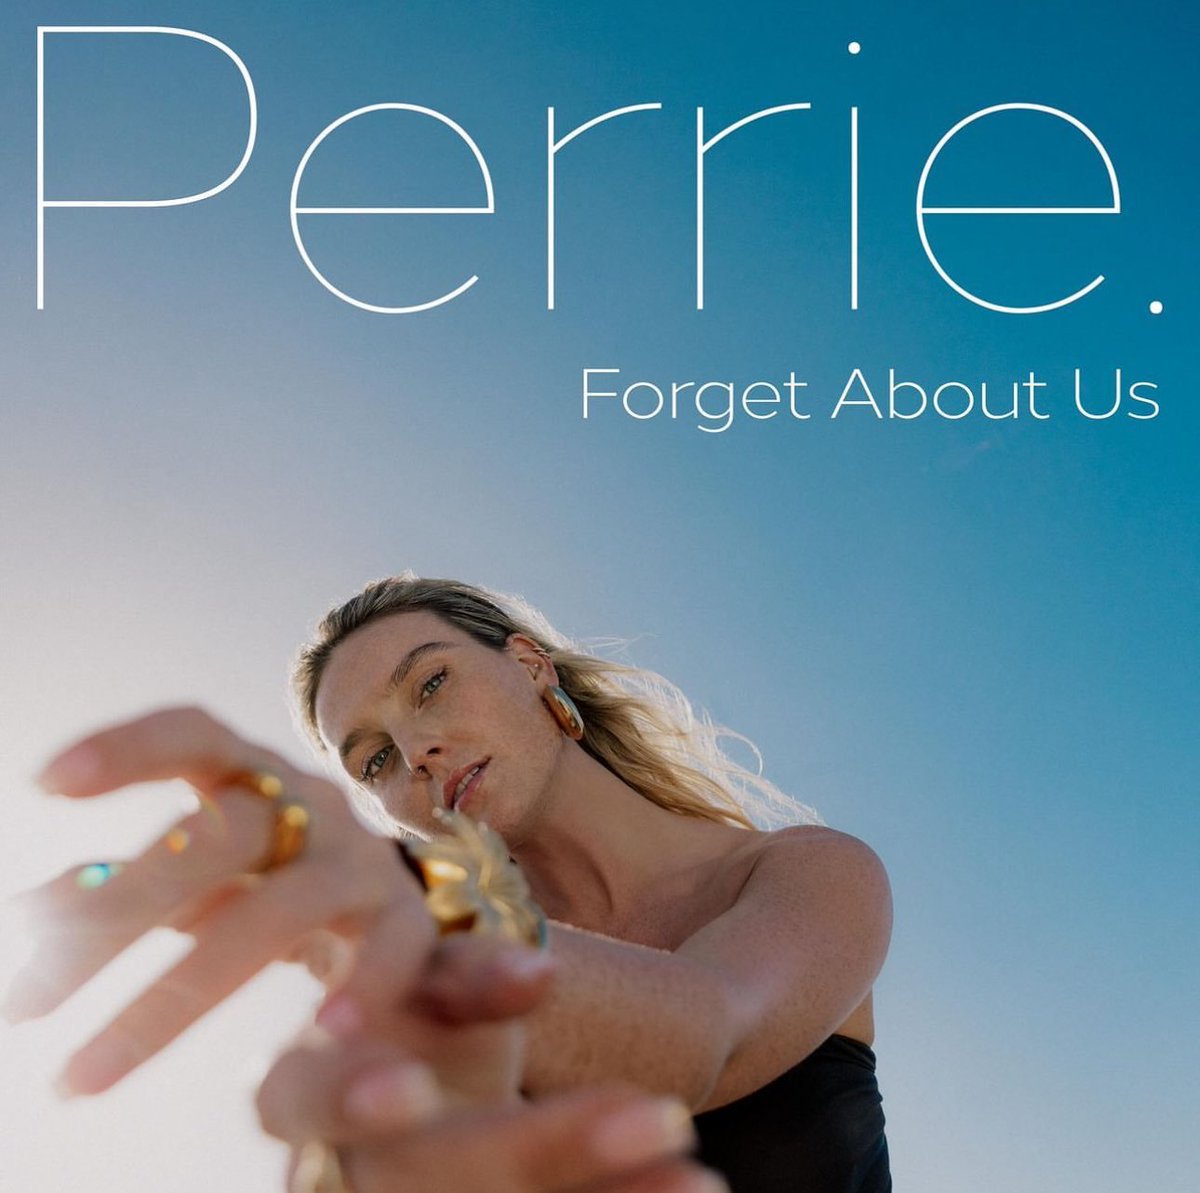 ‘Forget About Us’ by Perrie Edwards debuts at #10 in the UK. This becomes her first solo Top 10 hit on the chart.